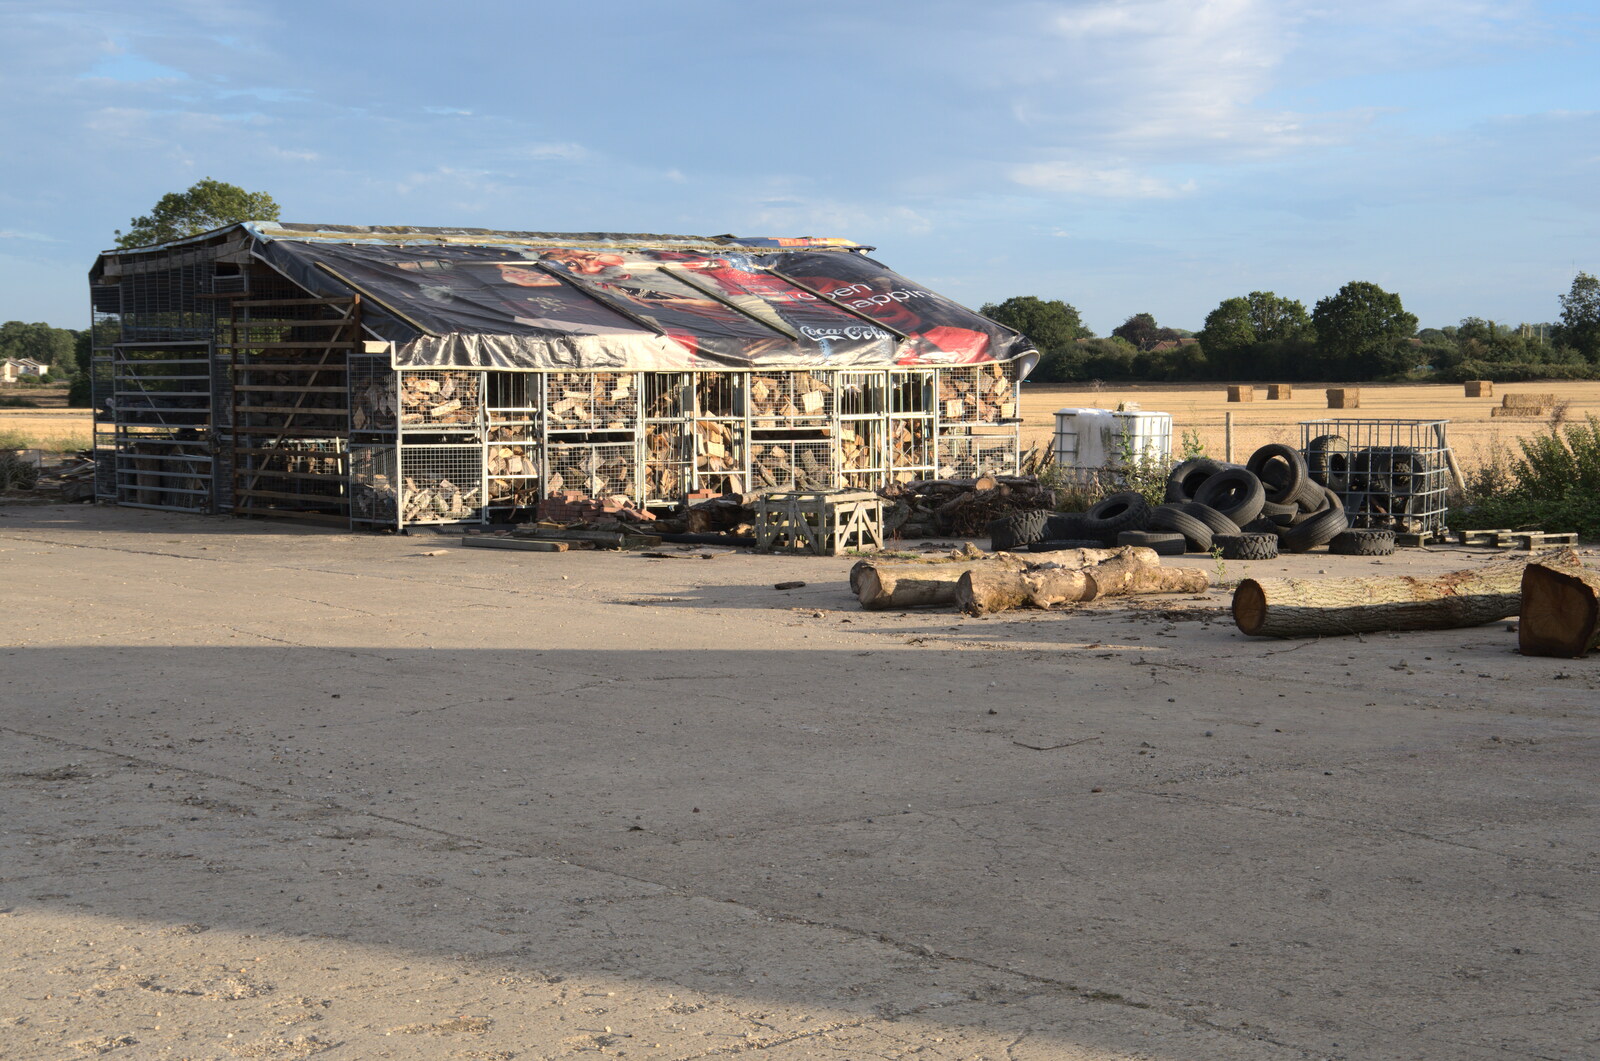 There's a big makeshift wood store on the airfield from Eye Airfield with Mick the Brick, Eye, Suffolk - 5th August 2020